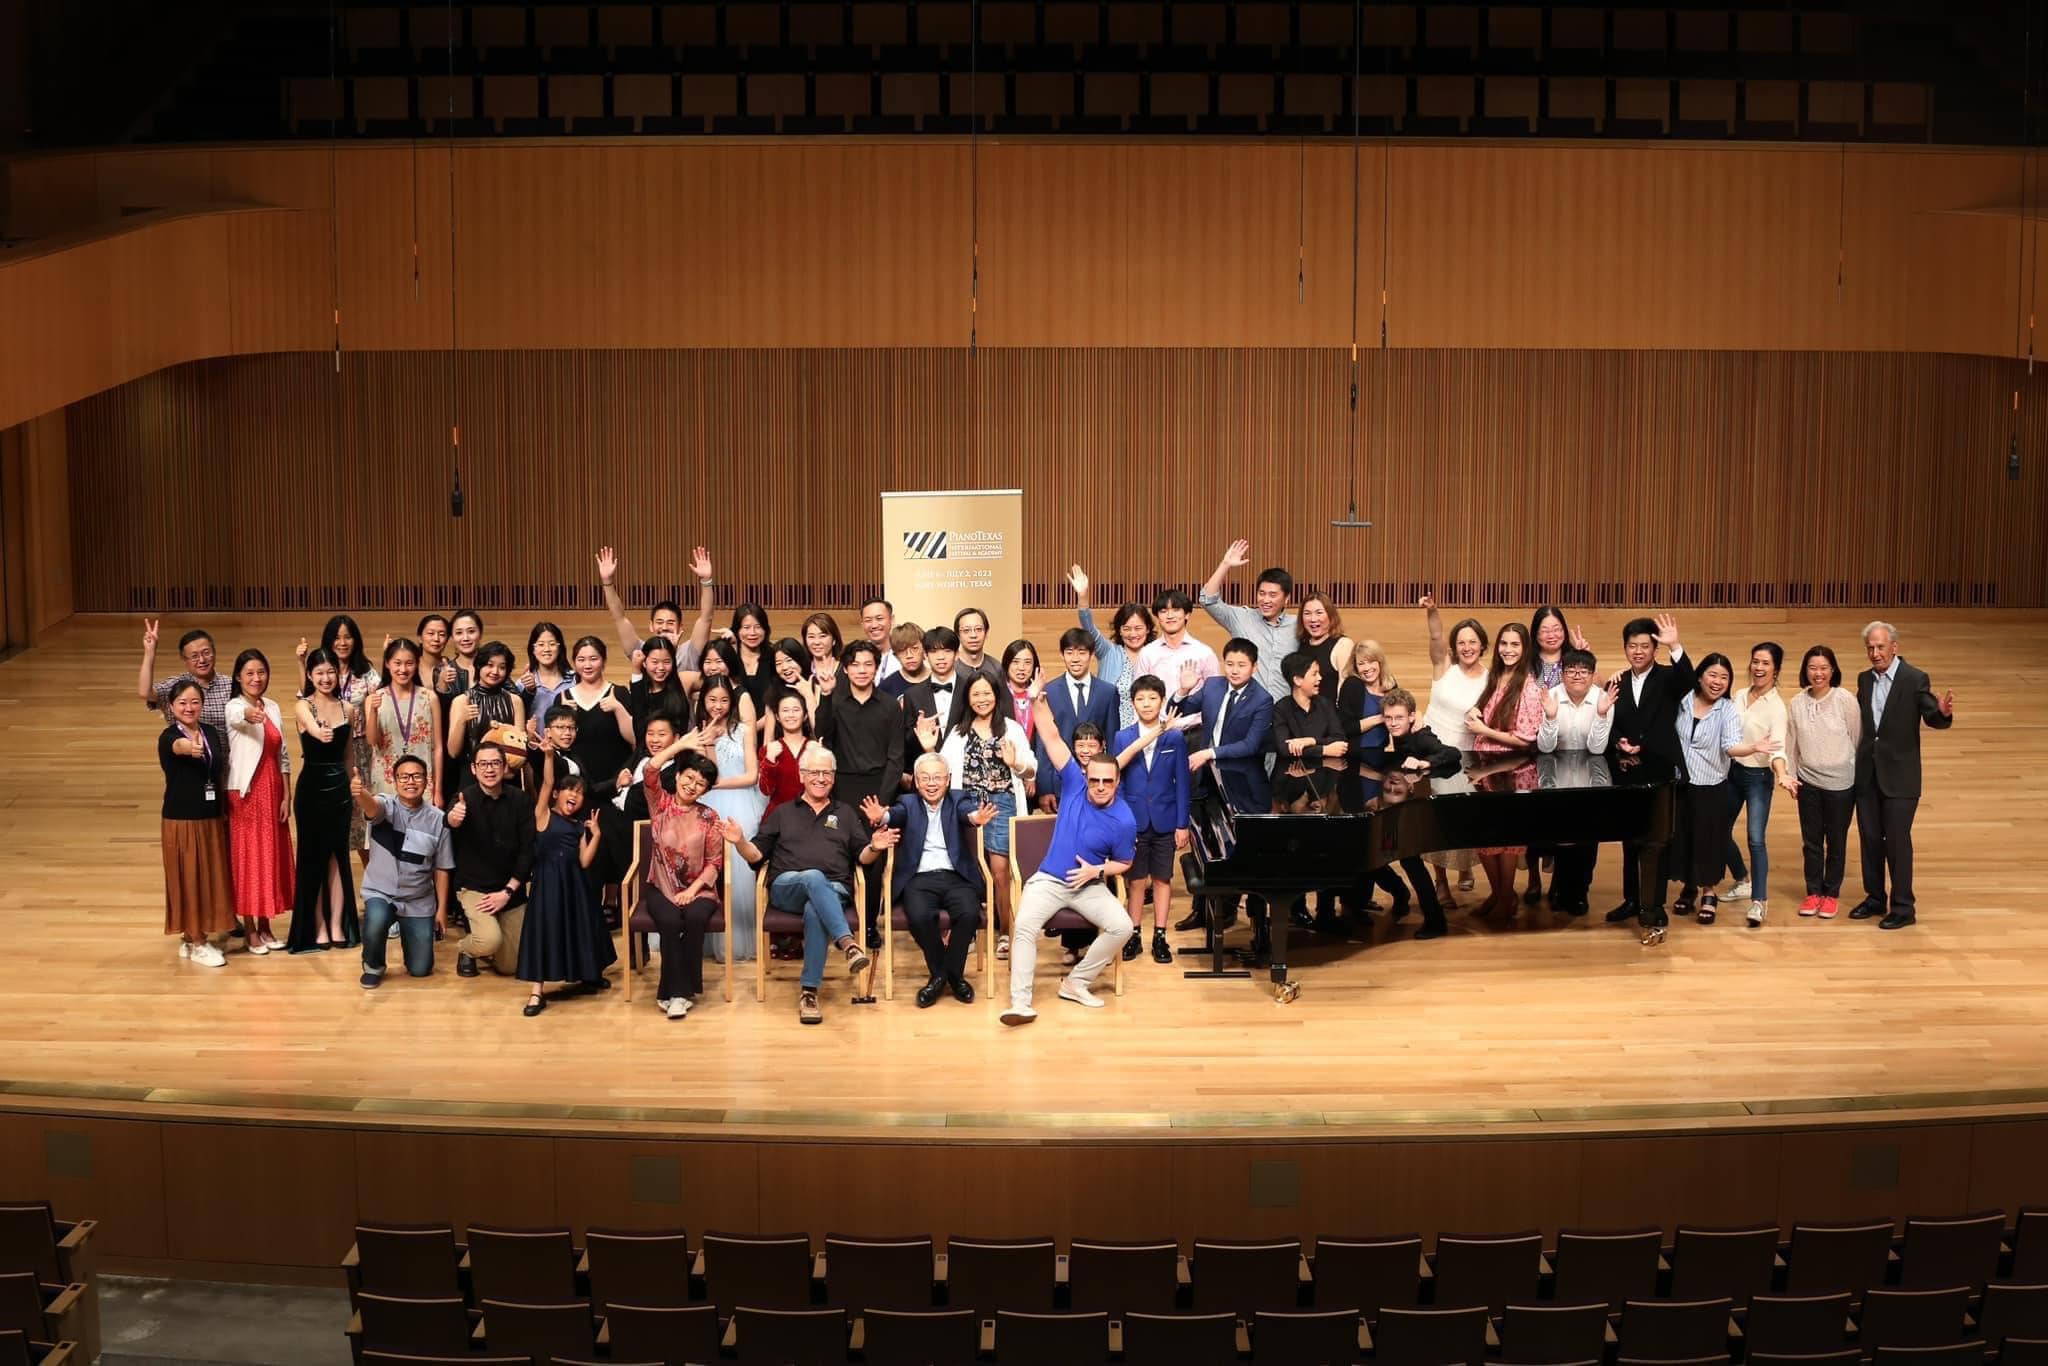 Group photo of PianoTexas participants on stage at the Van Cliburn Concert Hall at TCU. 